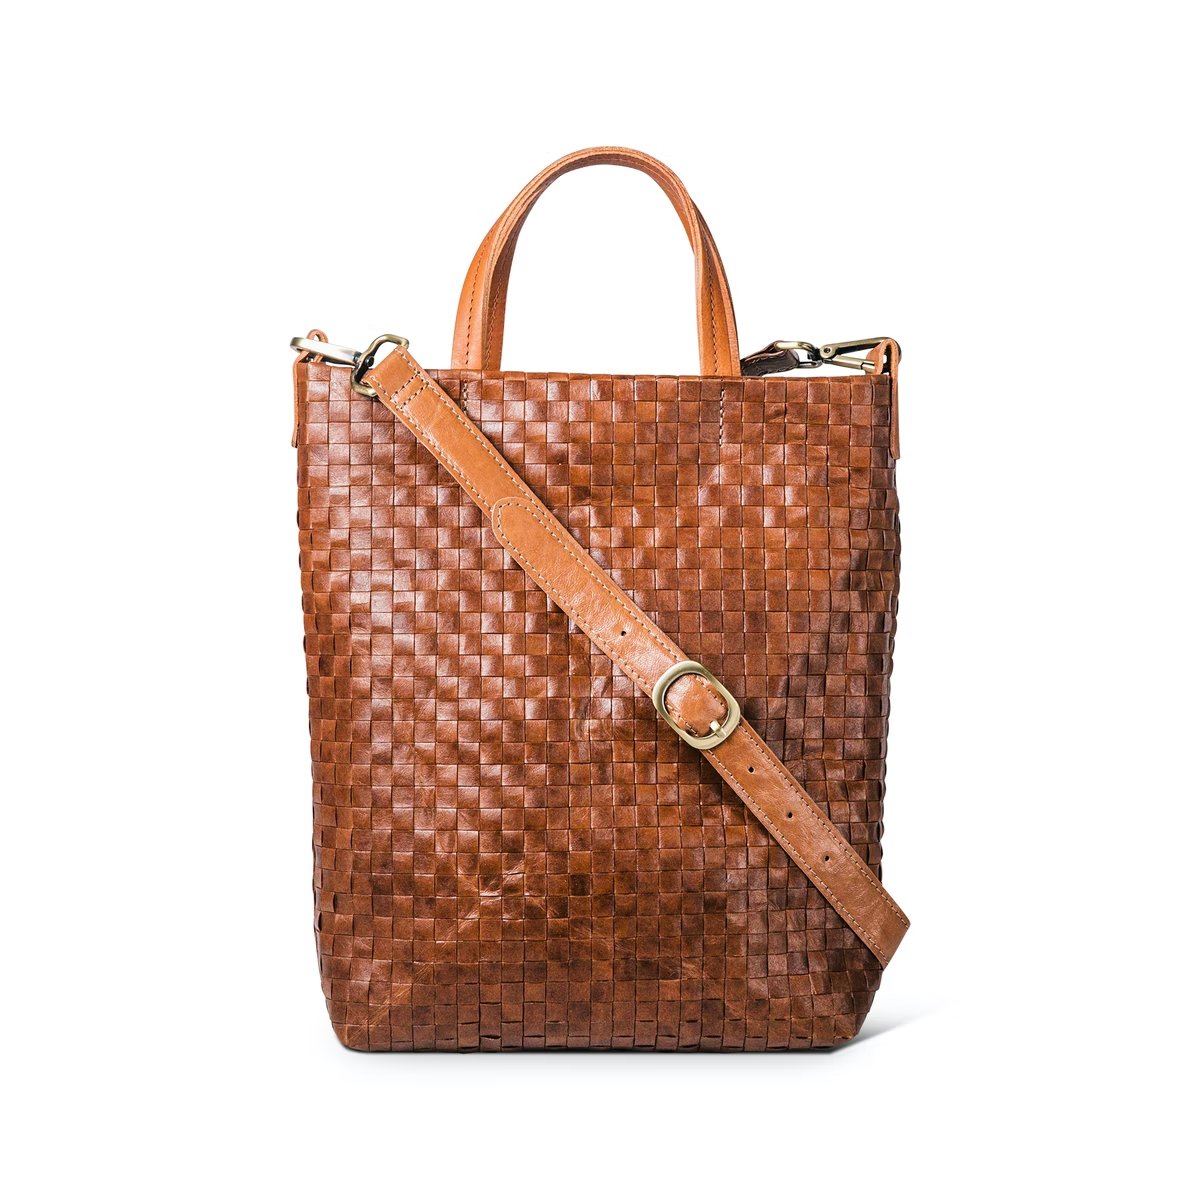 A woven washable paper tote bag is shown from the front angle. It features two top handles and a long adjustable shoulder strap. It is brown in colour.